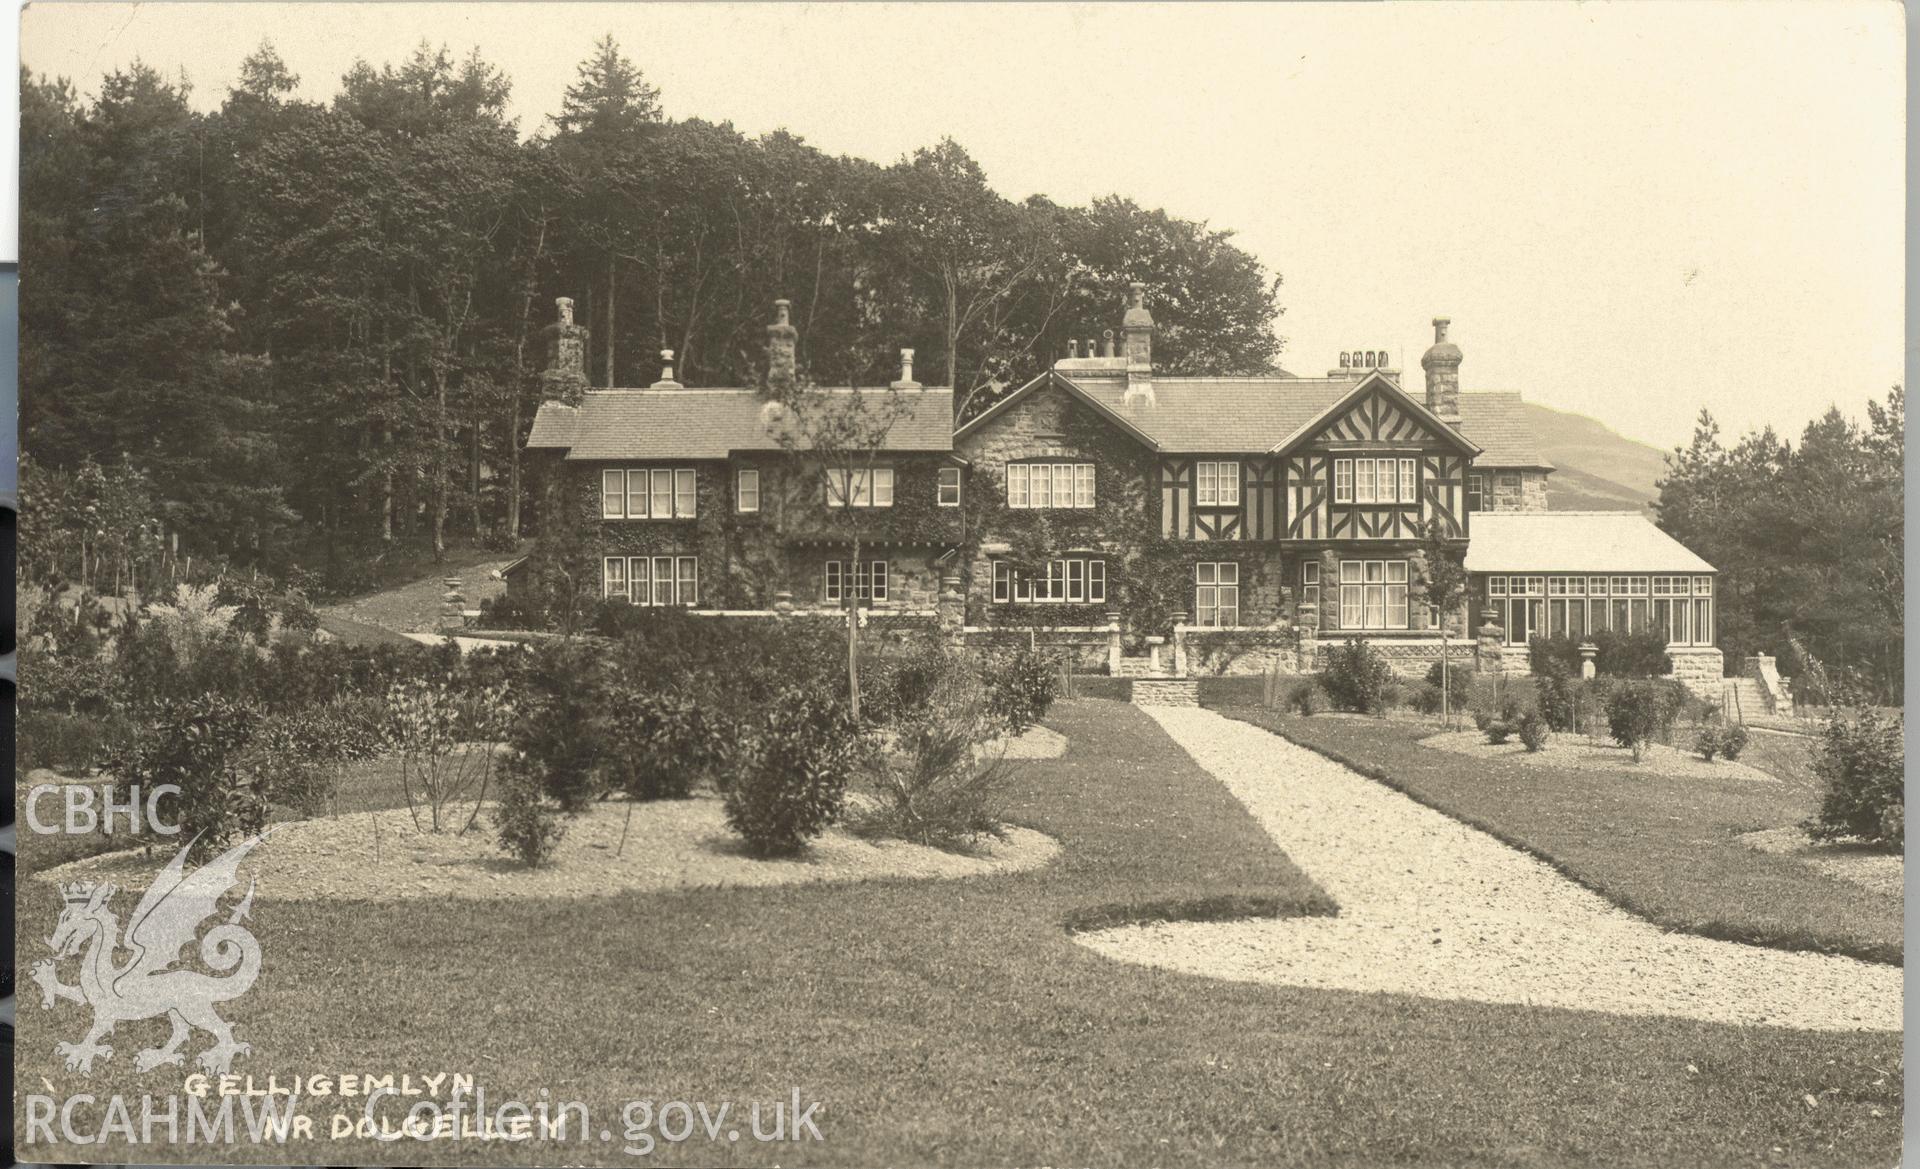 Digitised postcard image of Gellgemlyn Hall, Ganllwyd, Arnfield's Series, Dolgelley. Produced by Parks and Gardens Data Services, from an original item in the Peter Davis Collection at Parks and Gardens UK. We hold only web-resolution images of this collection, suitable for viewing on screen and for research purposes only. We do not hold the original images, or publication quality scans.